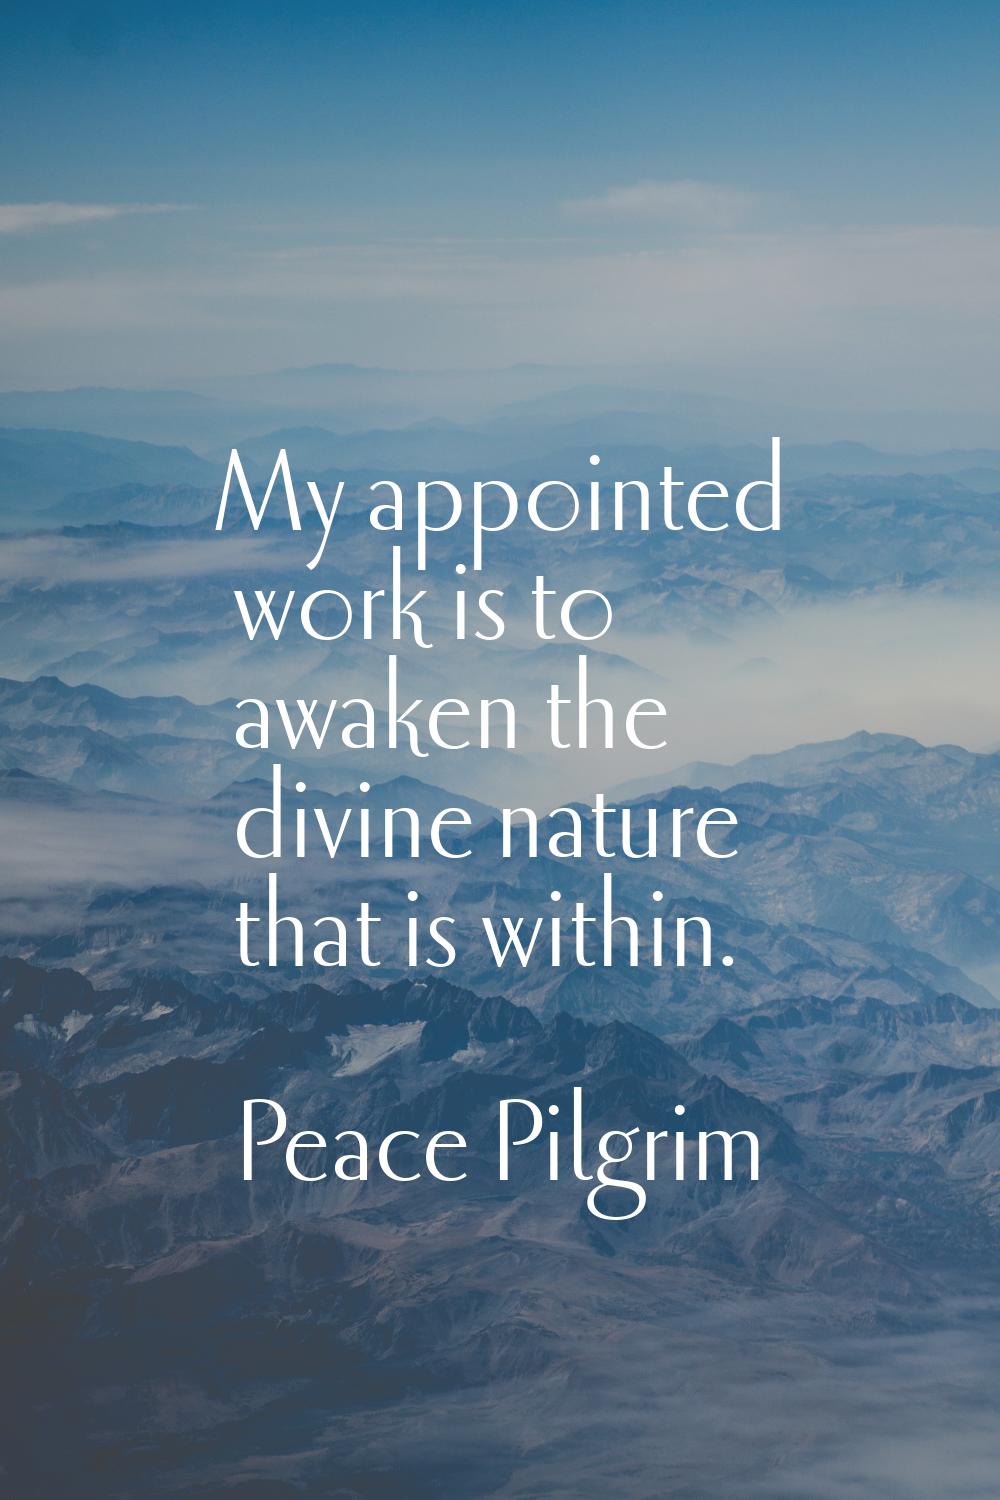 My appointed work is to awaken the divine nature that is within.